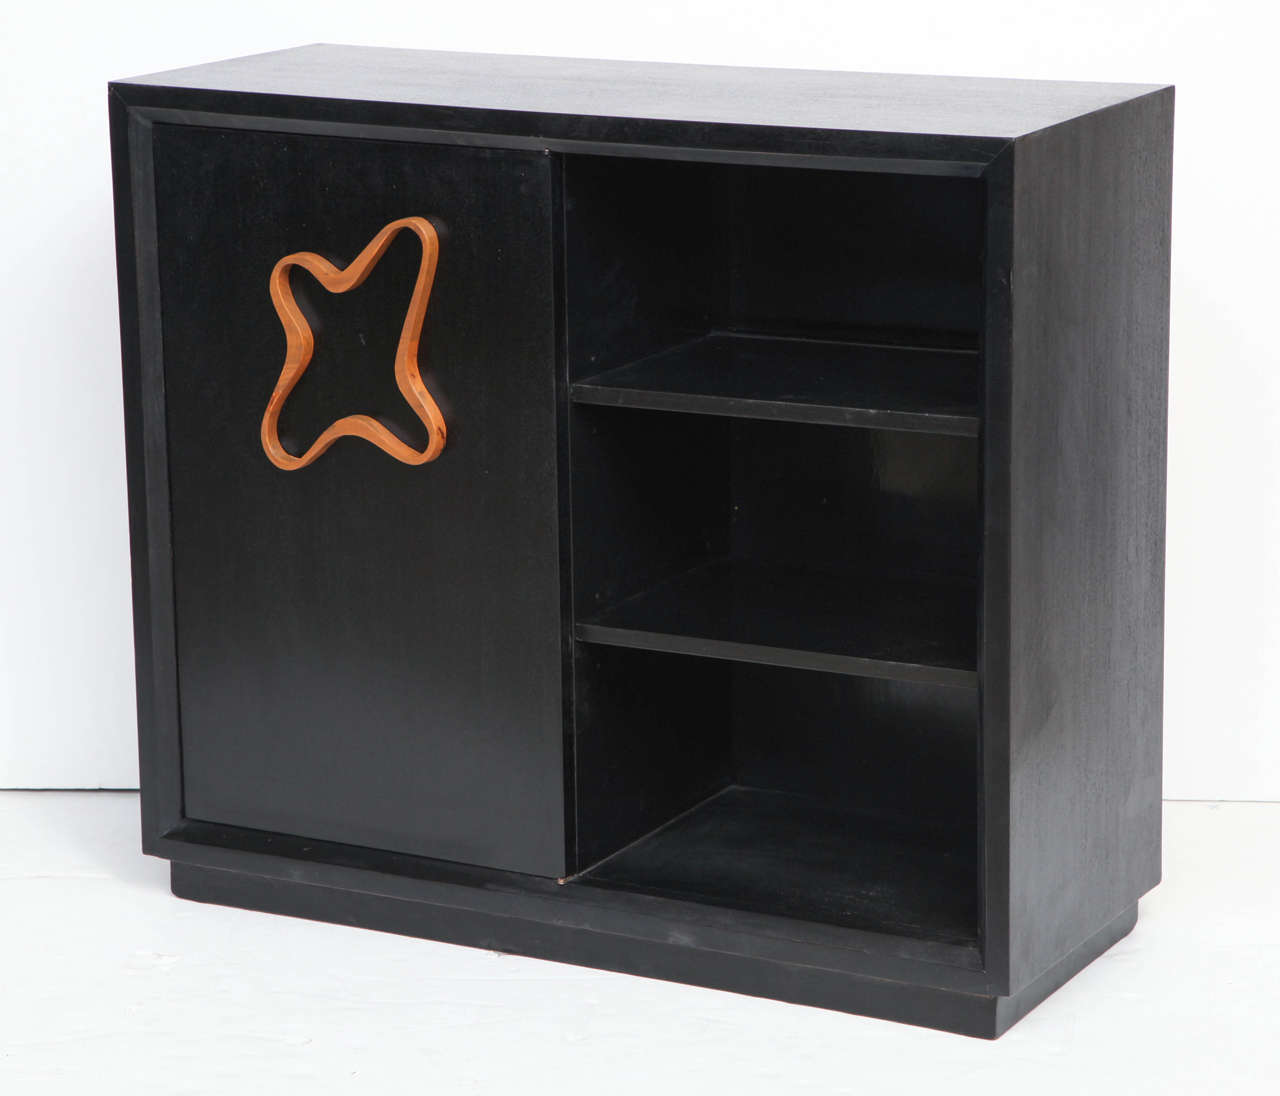 A pair of satin-black painted mahogany cabinets with bold quatrefoil pulls in light fruitwood. The cabinets are designed as a matching left/right pair, each having one open side with two adjustable shelves and a center-hinged door revealing two